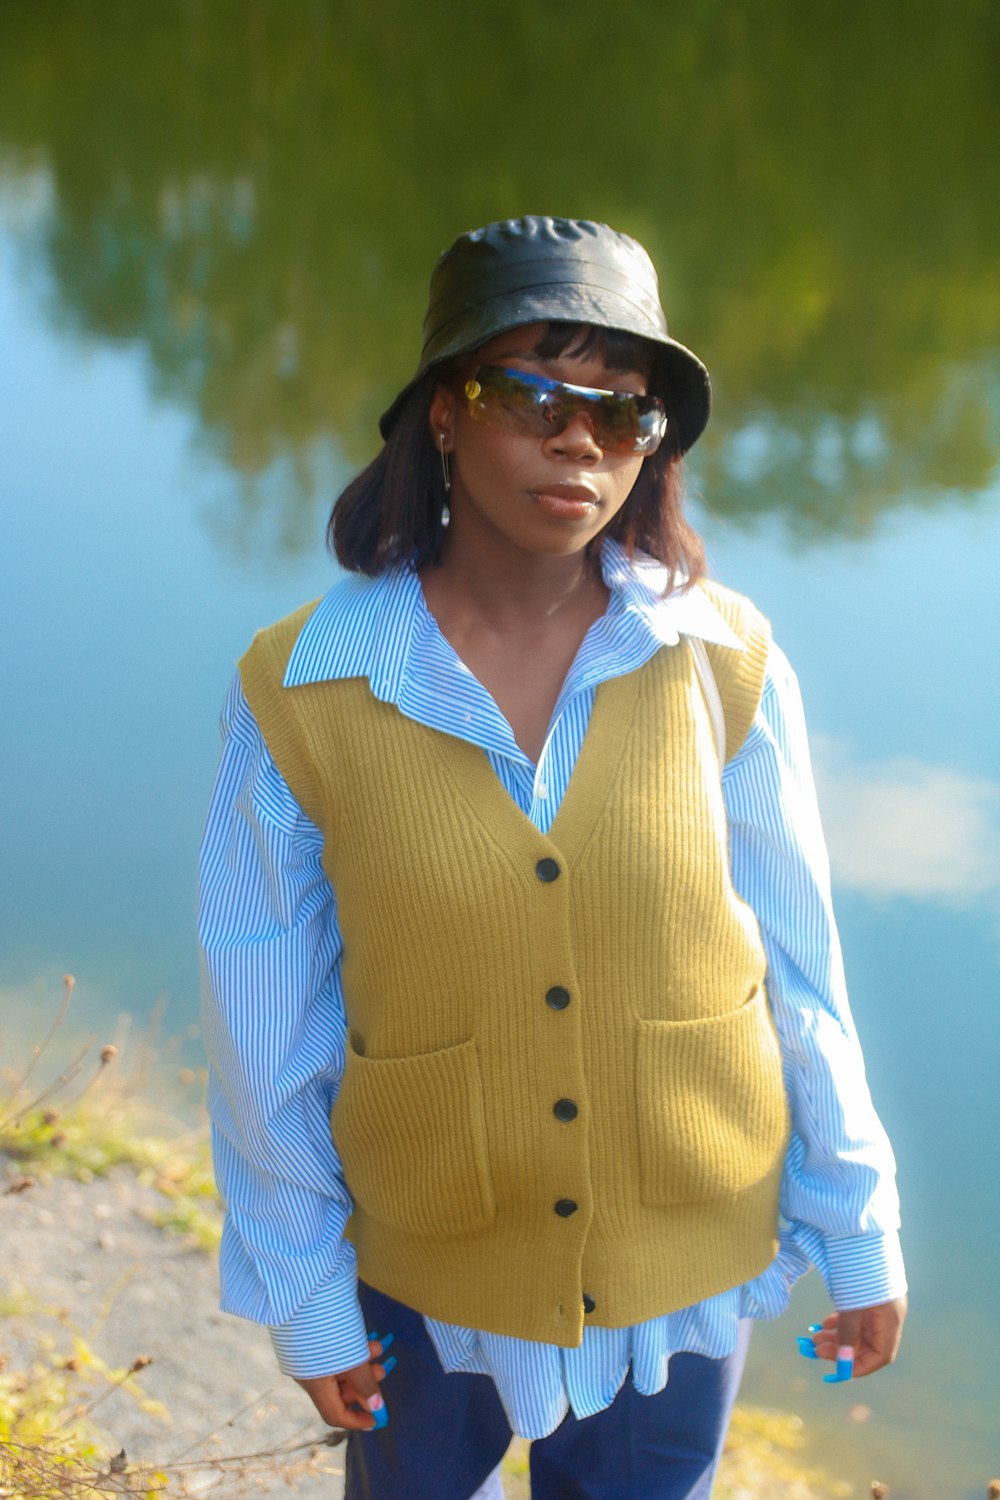 a woman wearing a hat and sunglasses standing next to a body of water